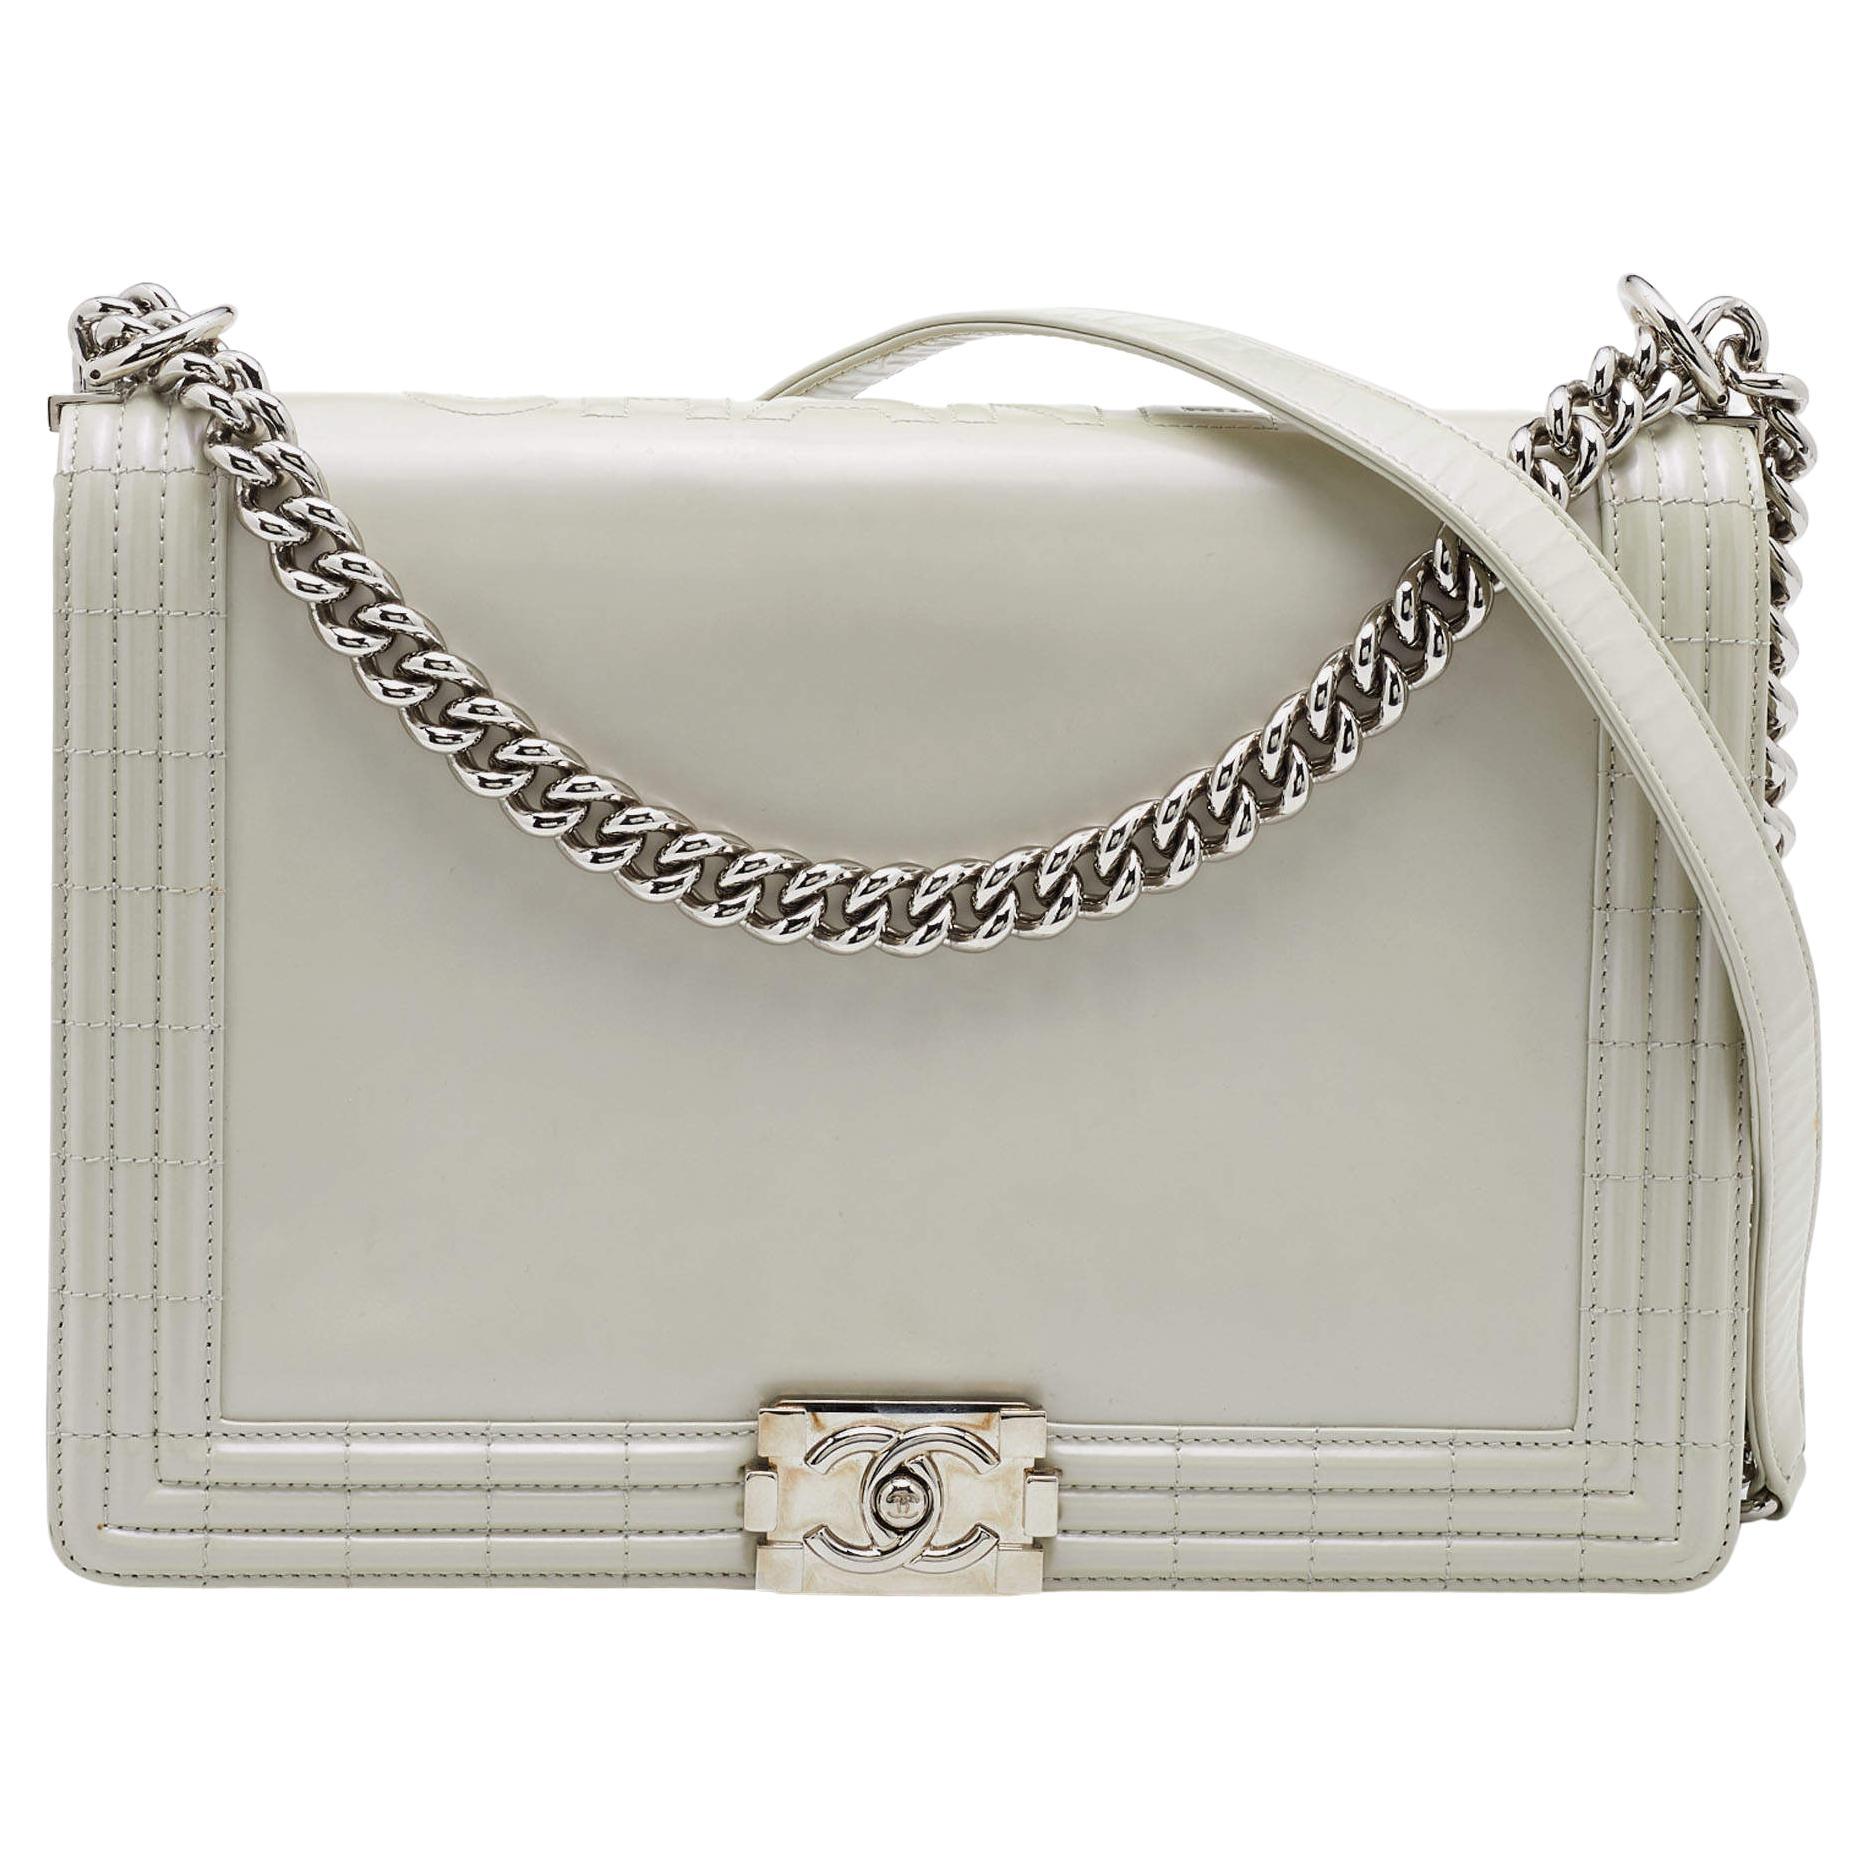 Chanel Pearl Iridescent Glazed Leather Large Reverso Boy Flap Bag